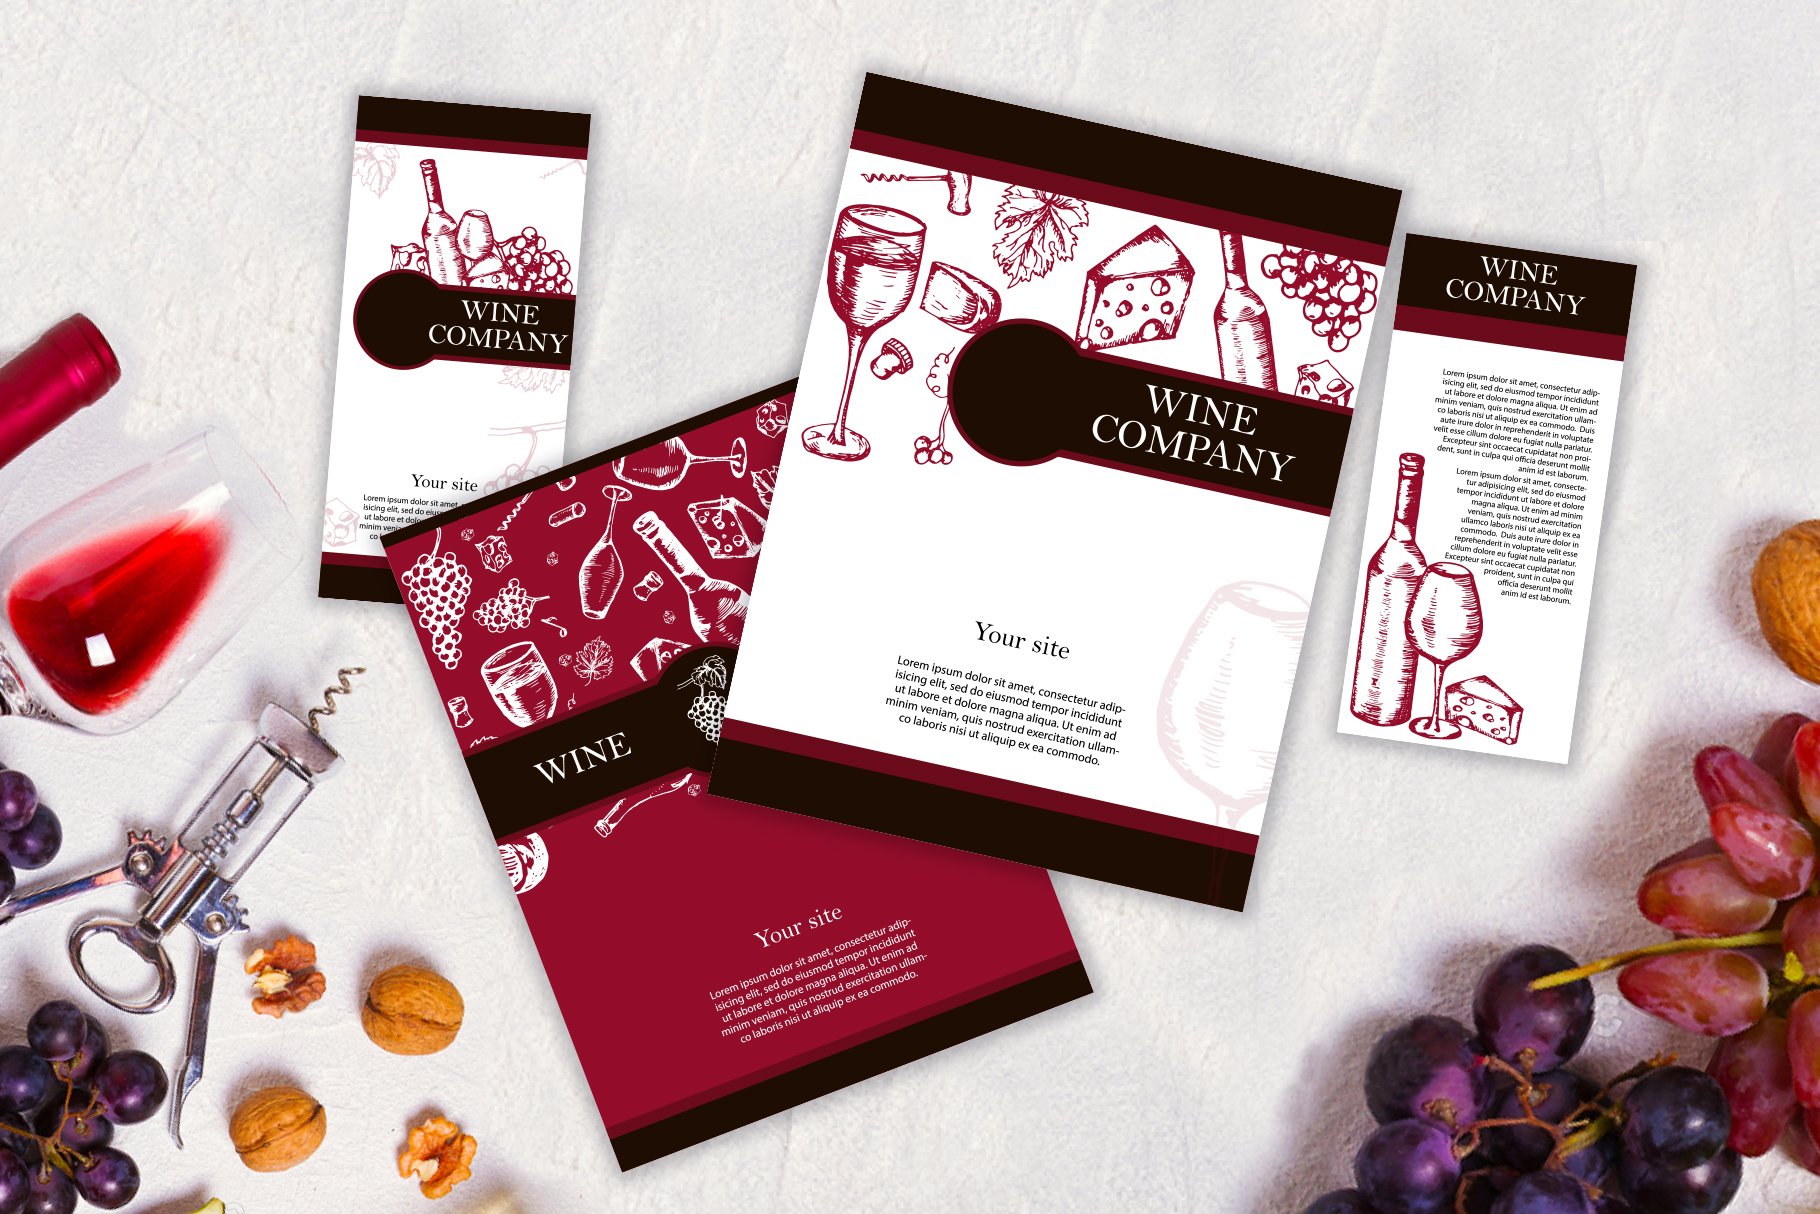 Some options of the wine menus.